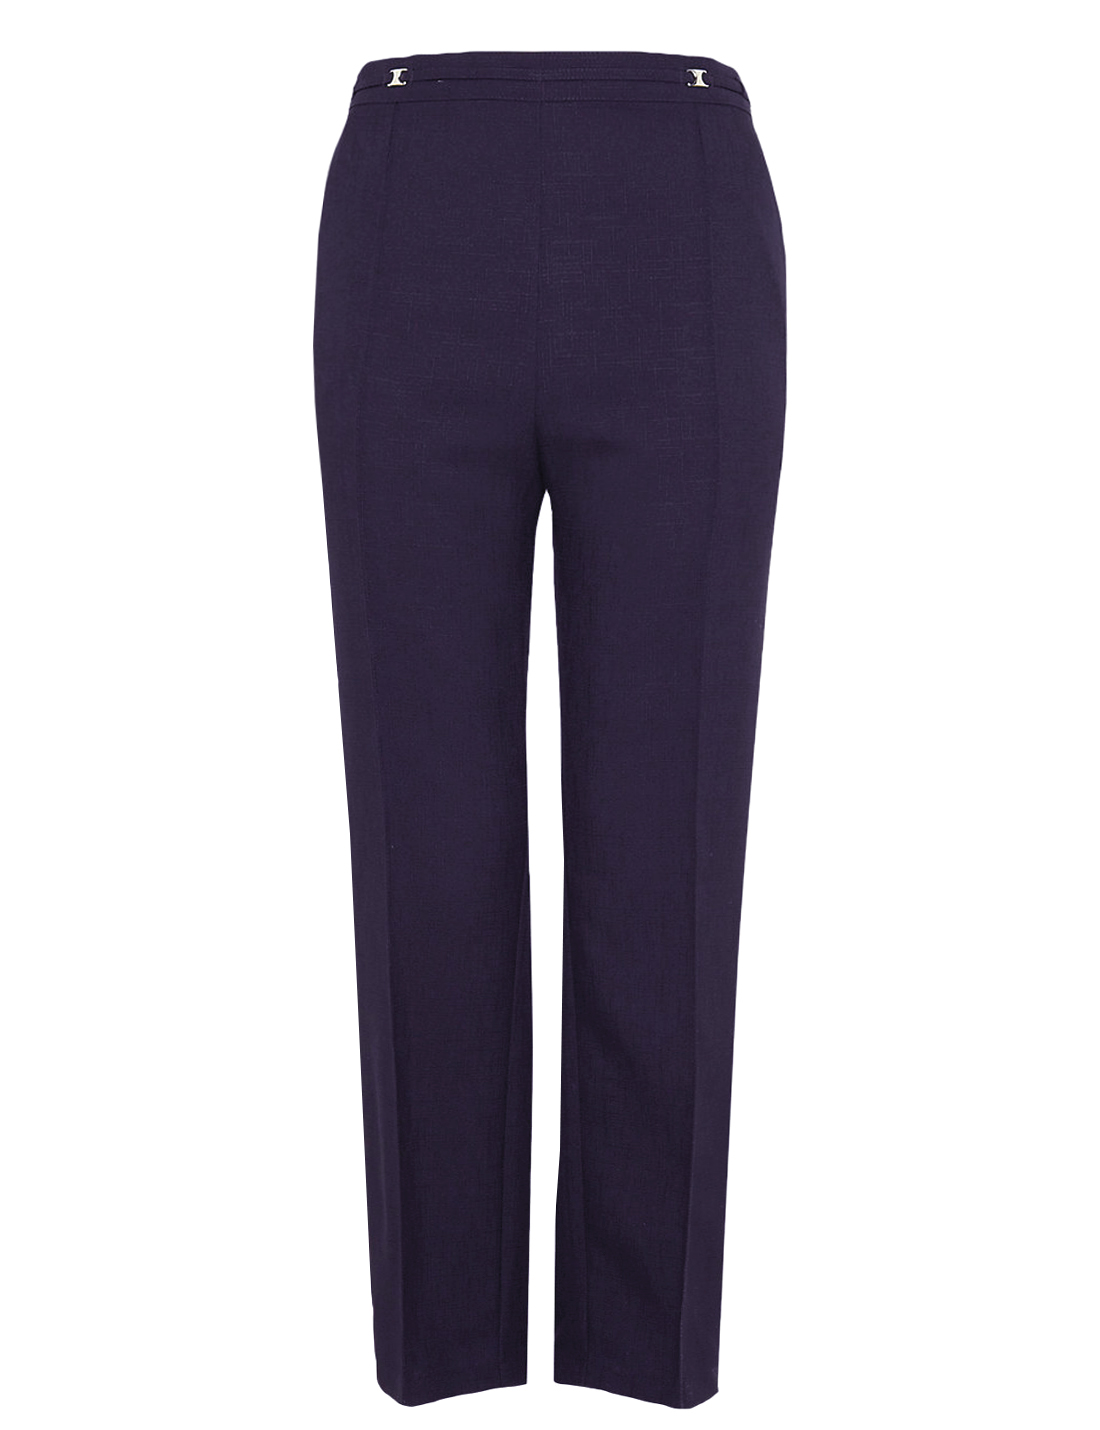 Marks and Spencer - - M&5 NAVY Easy Care Pull On Trousers - Size 10 to 16